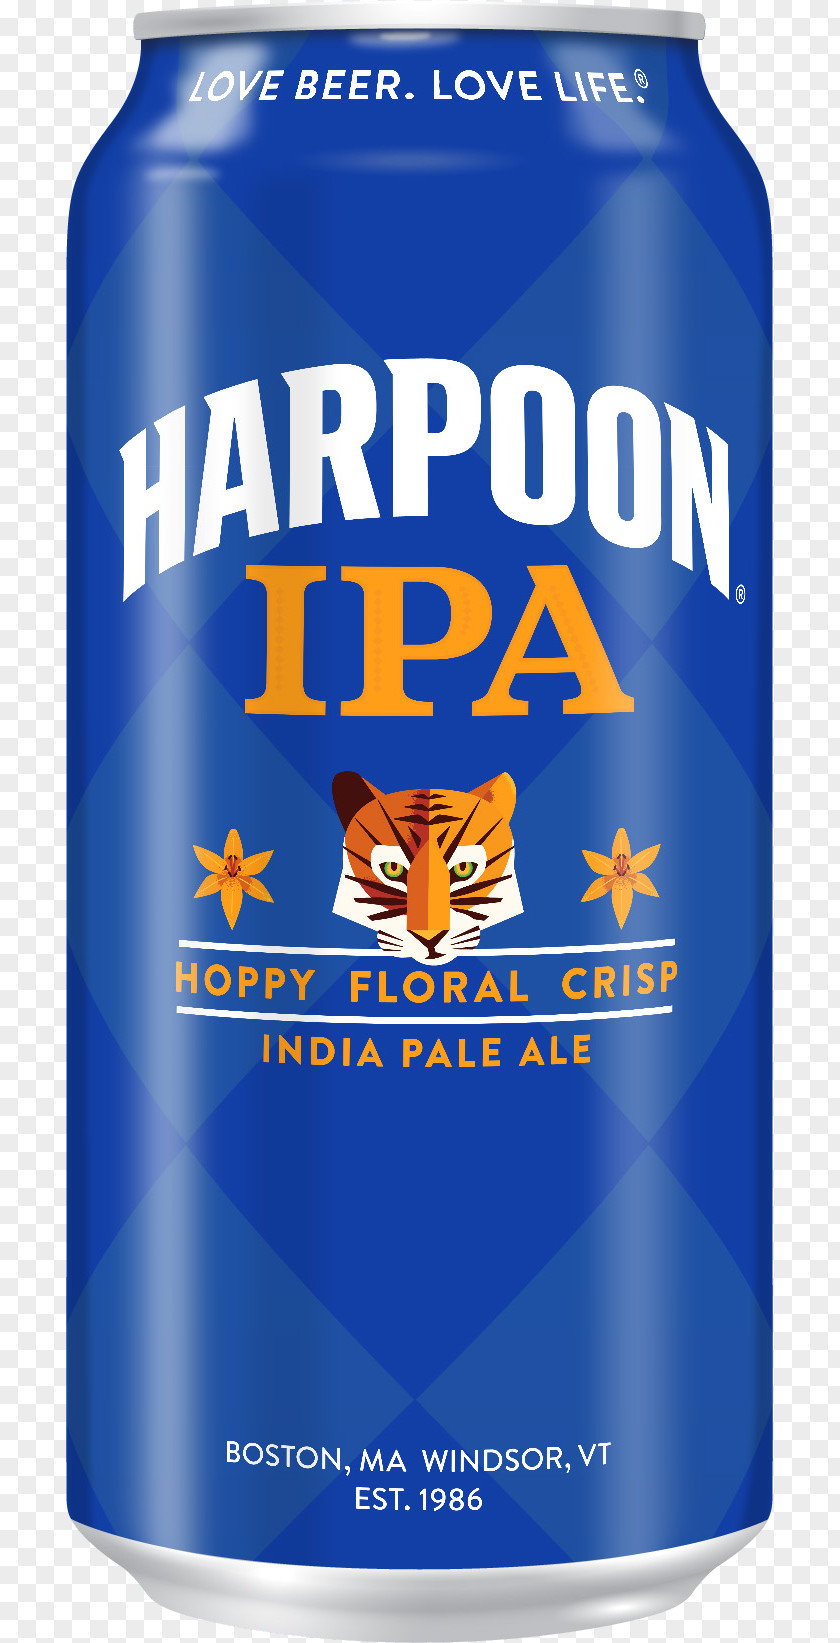 Beer Harpoon Brewery India Pale Ale IPA Lager PNG